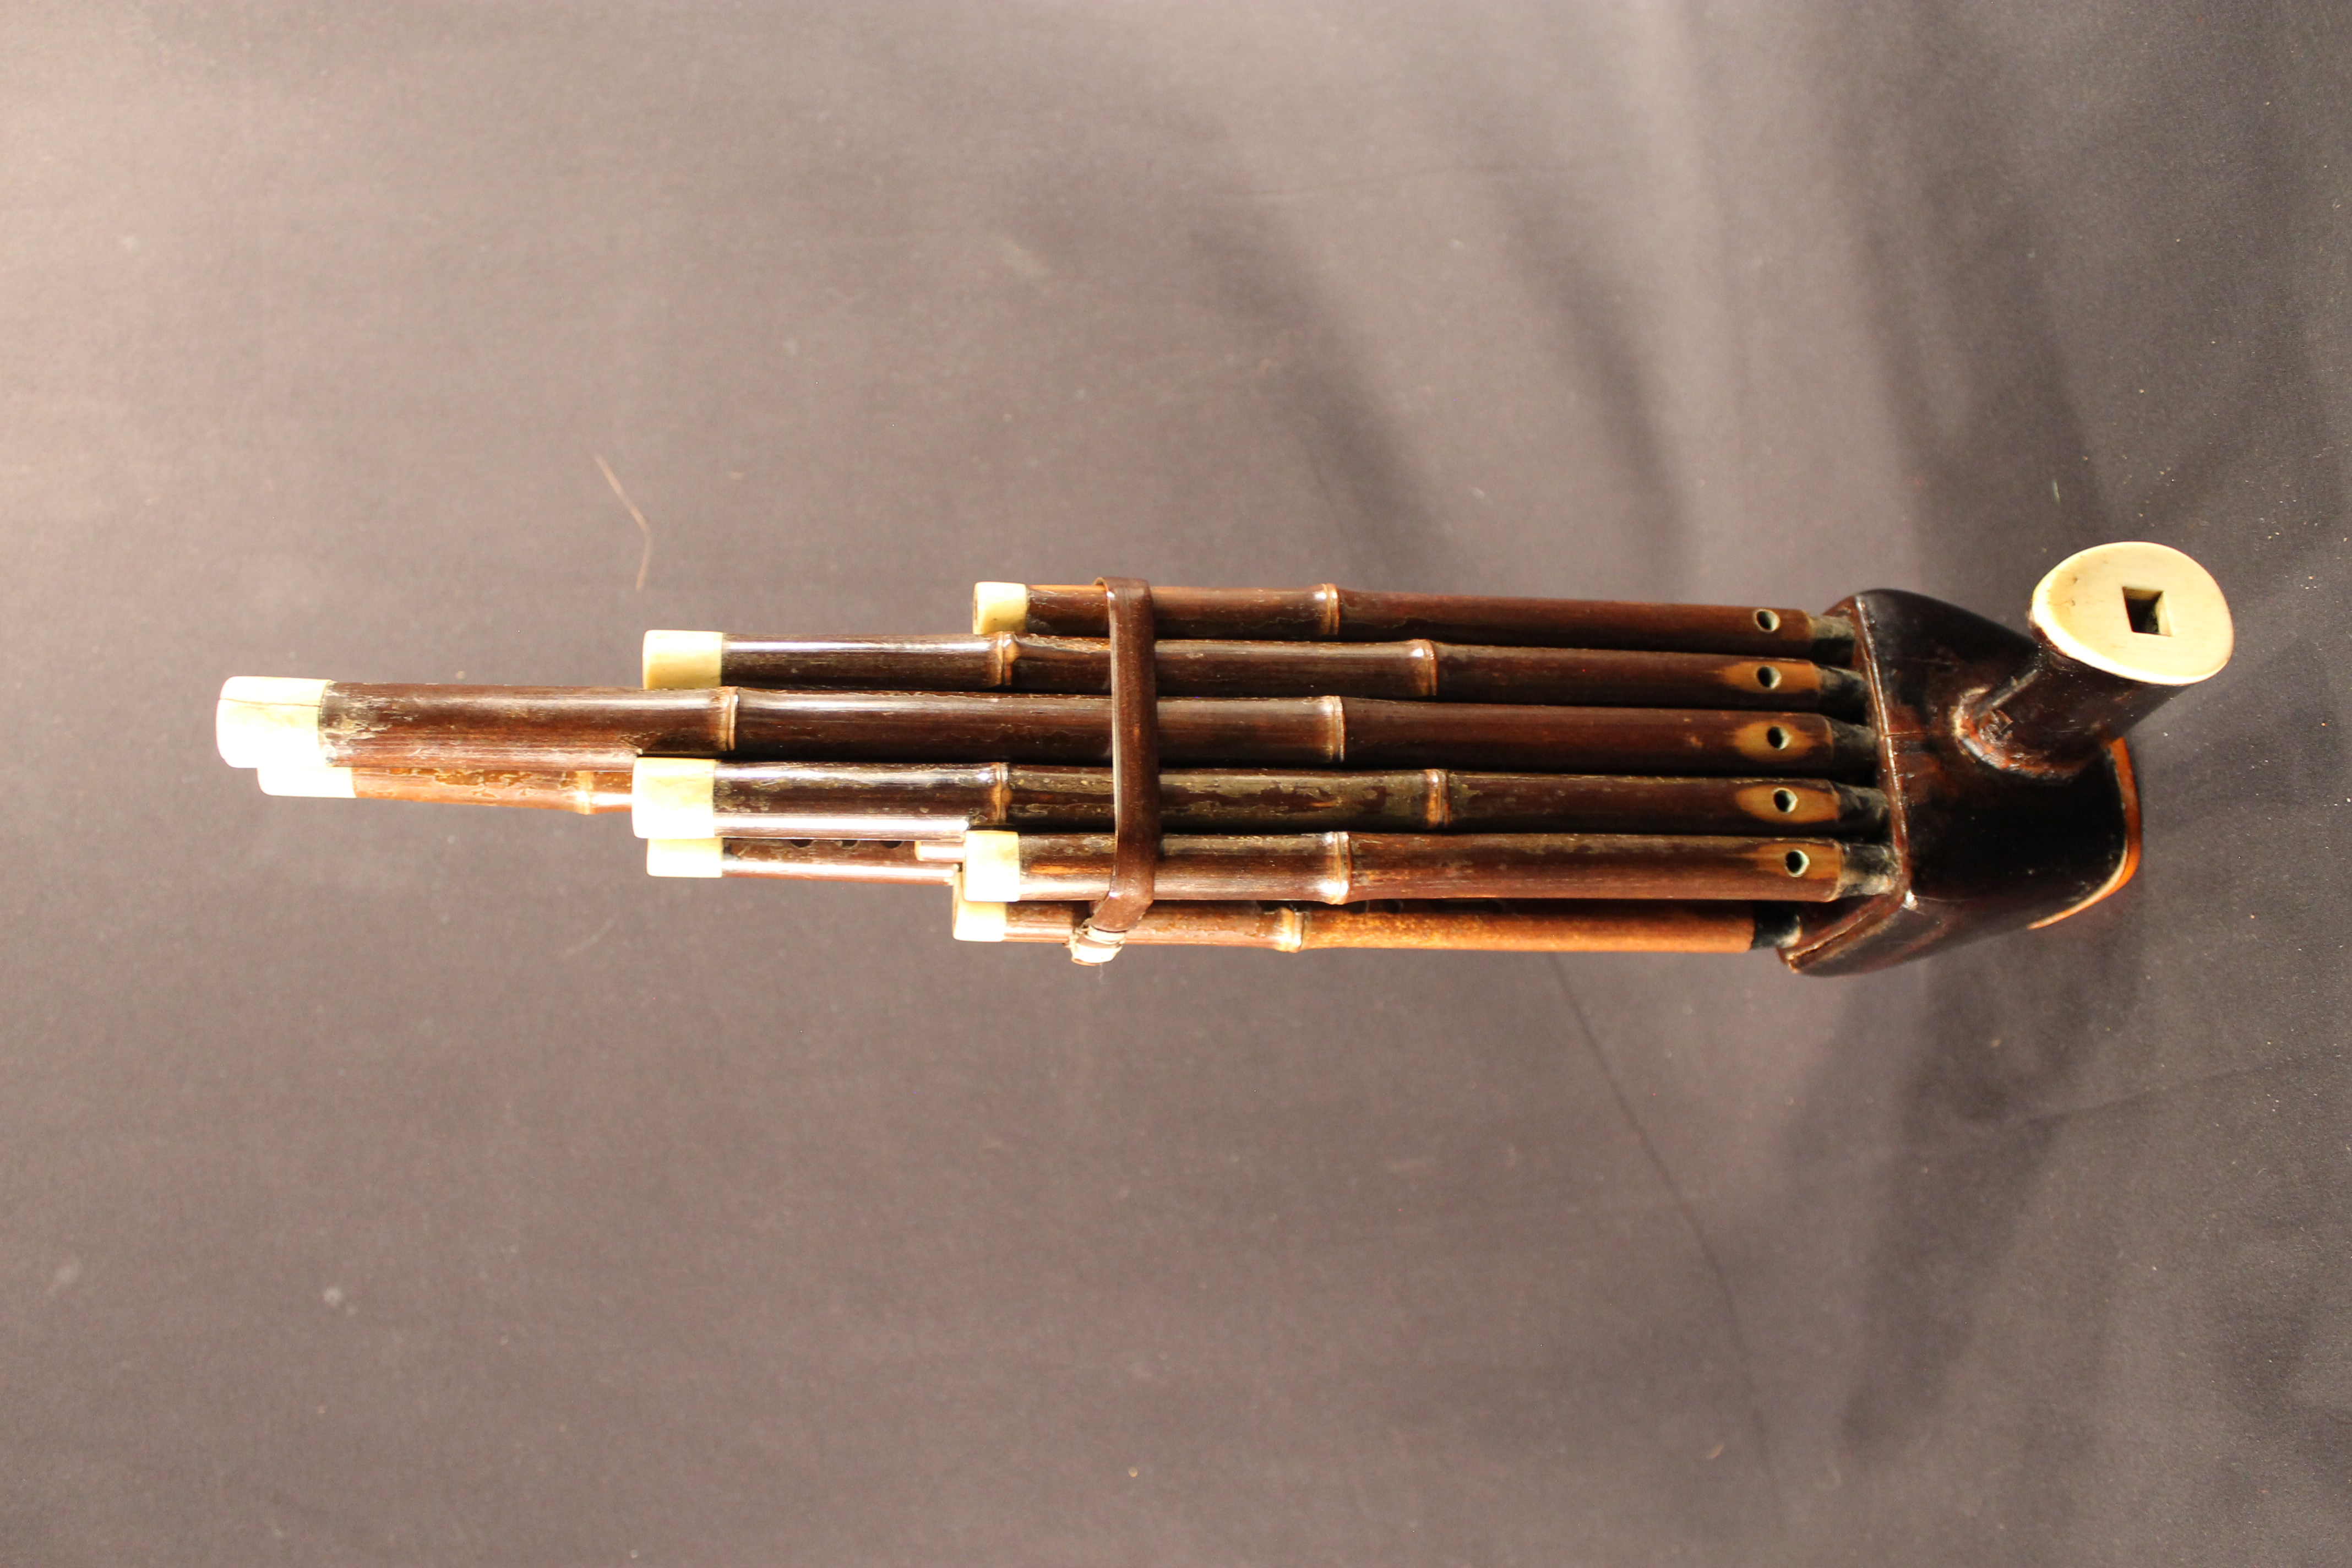  An instrument made up of ten dark wooden pipes and a mouthpiece. The pipes are held together with a wooden band, then they connect to the mouthpiece that extends off of the side. Ivory pieces surround the top of the pipes and on the mouthpiece. 